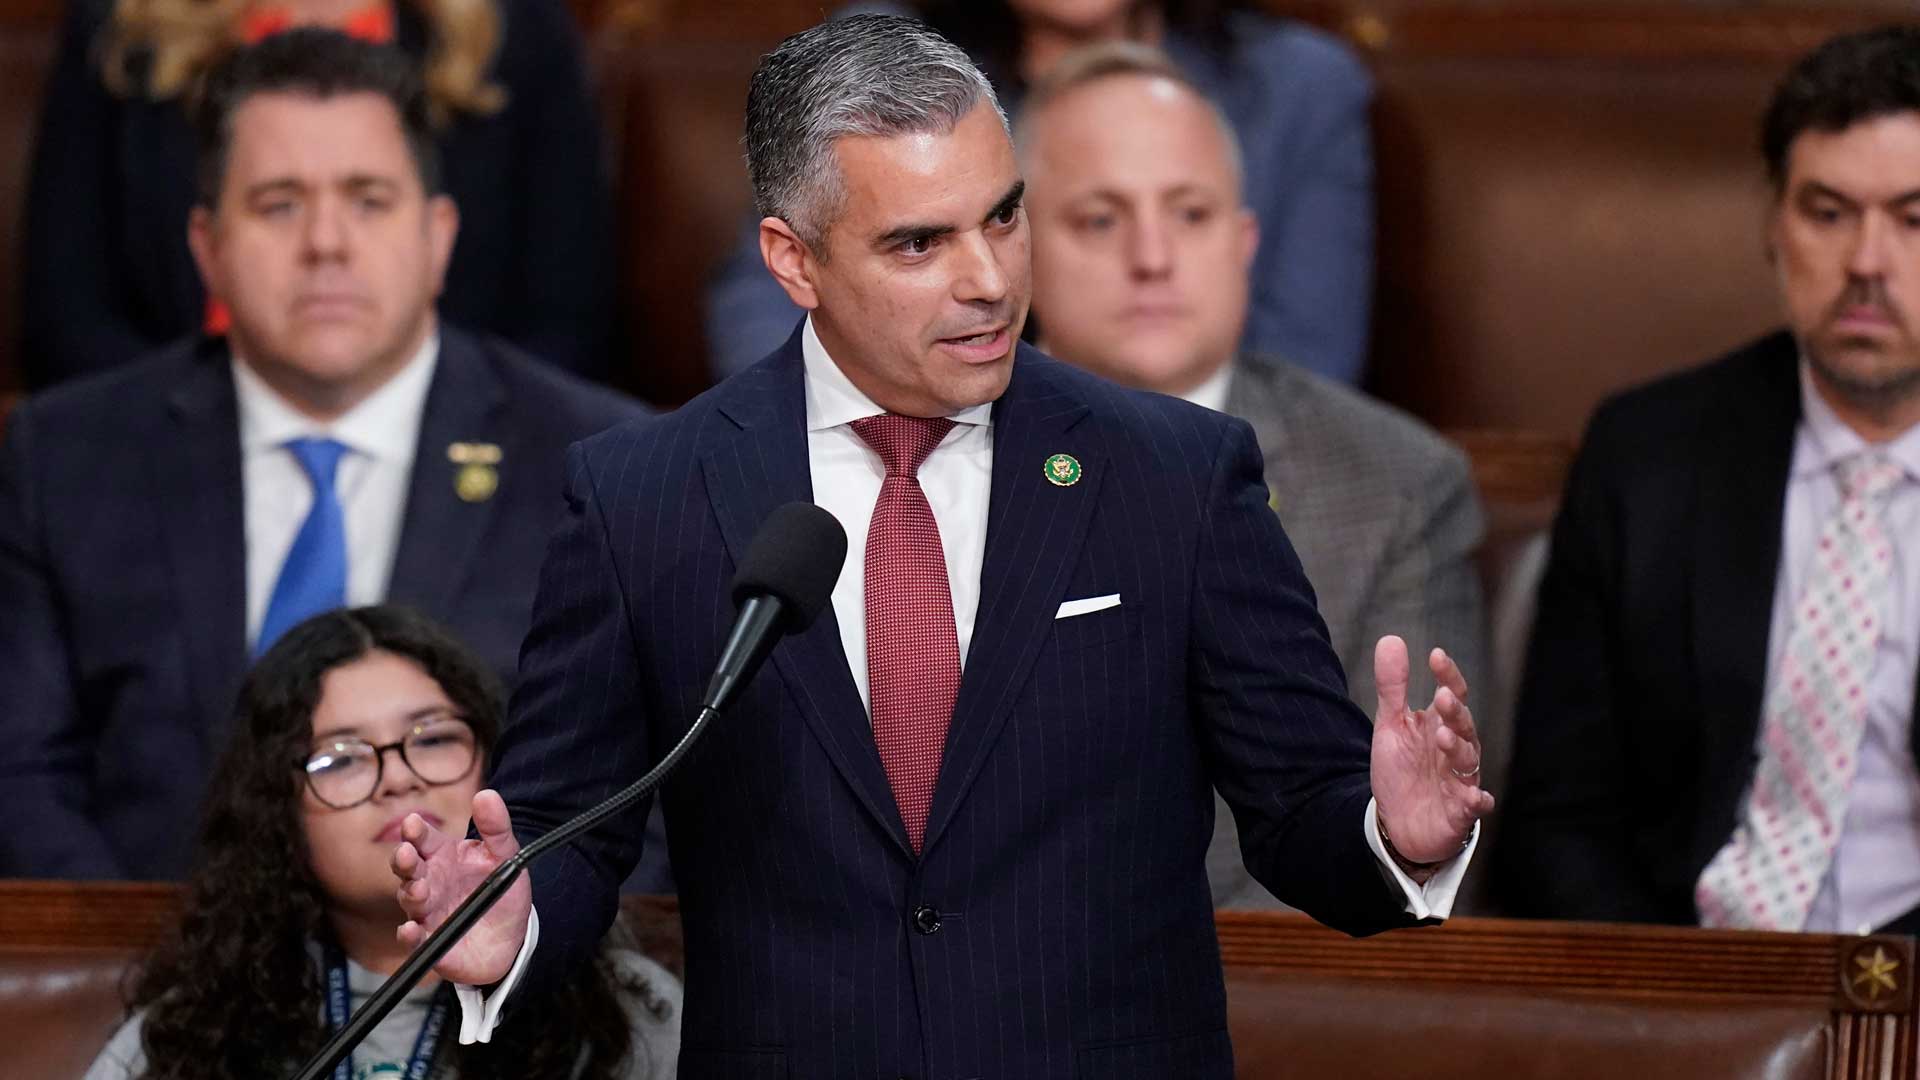 Rep.-elect Juan Ciscomani, R-Ariz., nominates Rep. Kevin McCarthy, R-Calif., as the House meets for the third day to elect a speaker and convene the 118th Congress in Washington, Thursday, Jan. 5, 2023.